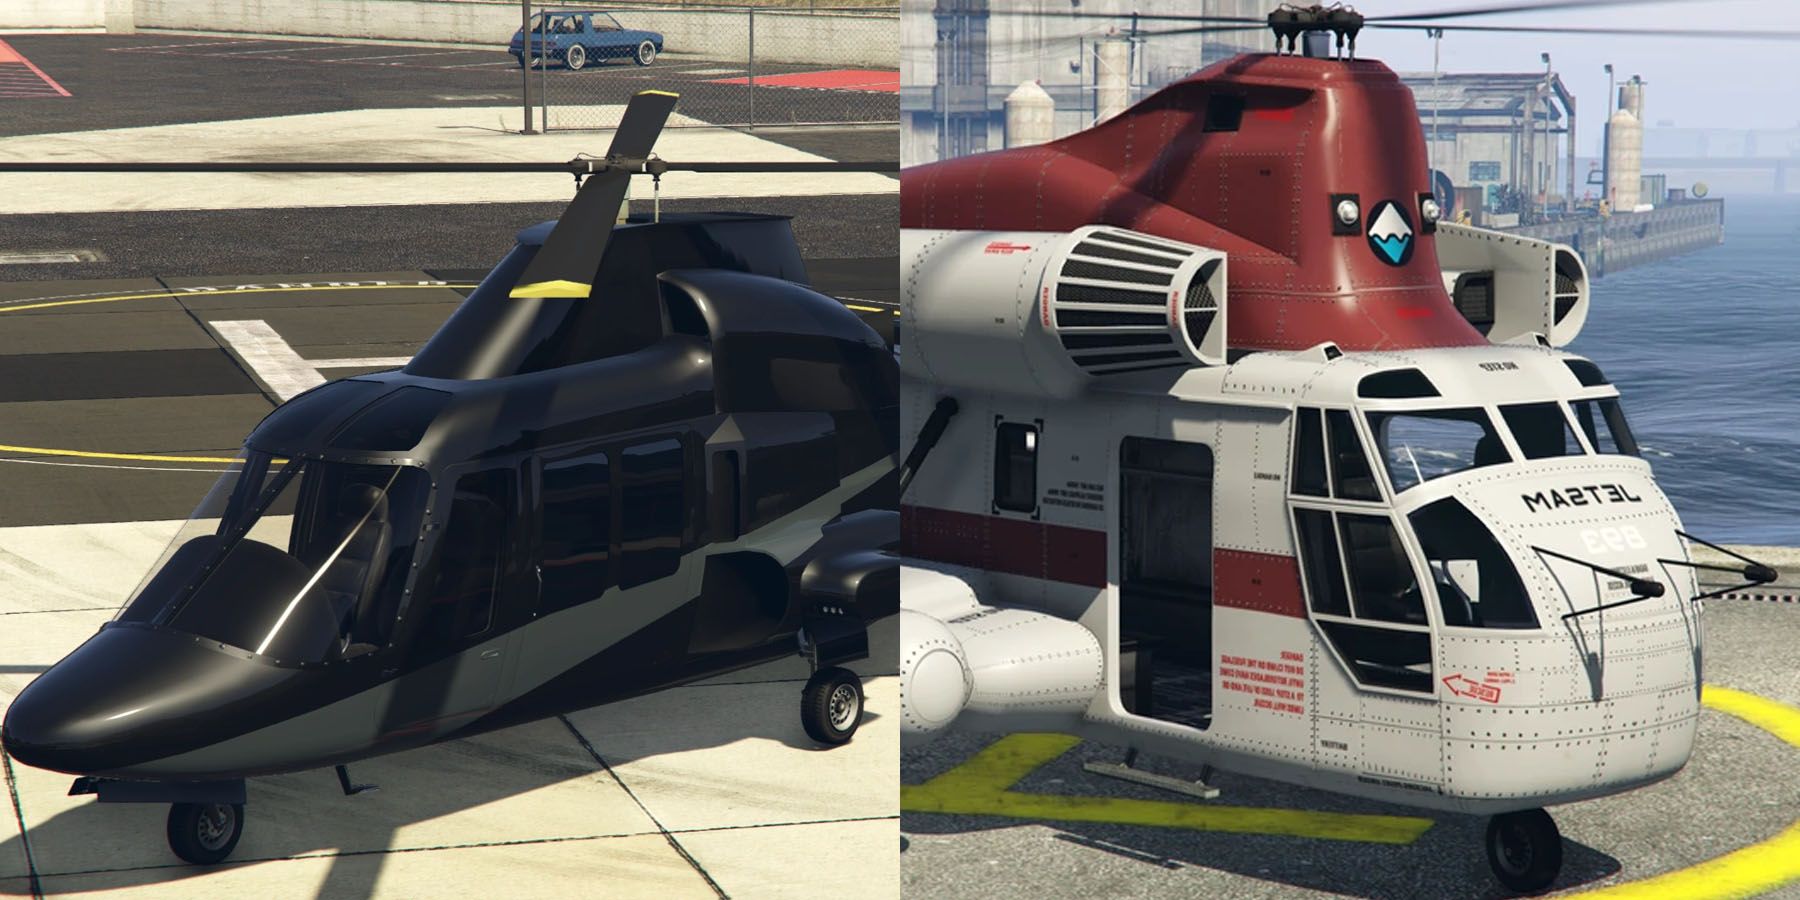 How to Purchase Your Very Own Cargobob Helicopter in GTA 5 Online «  PlayStation 3 :: WonderHowTo